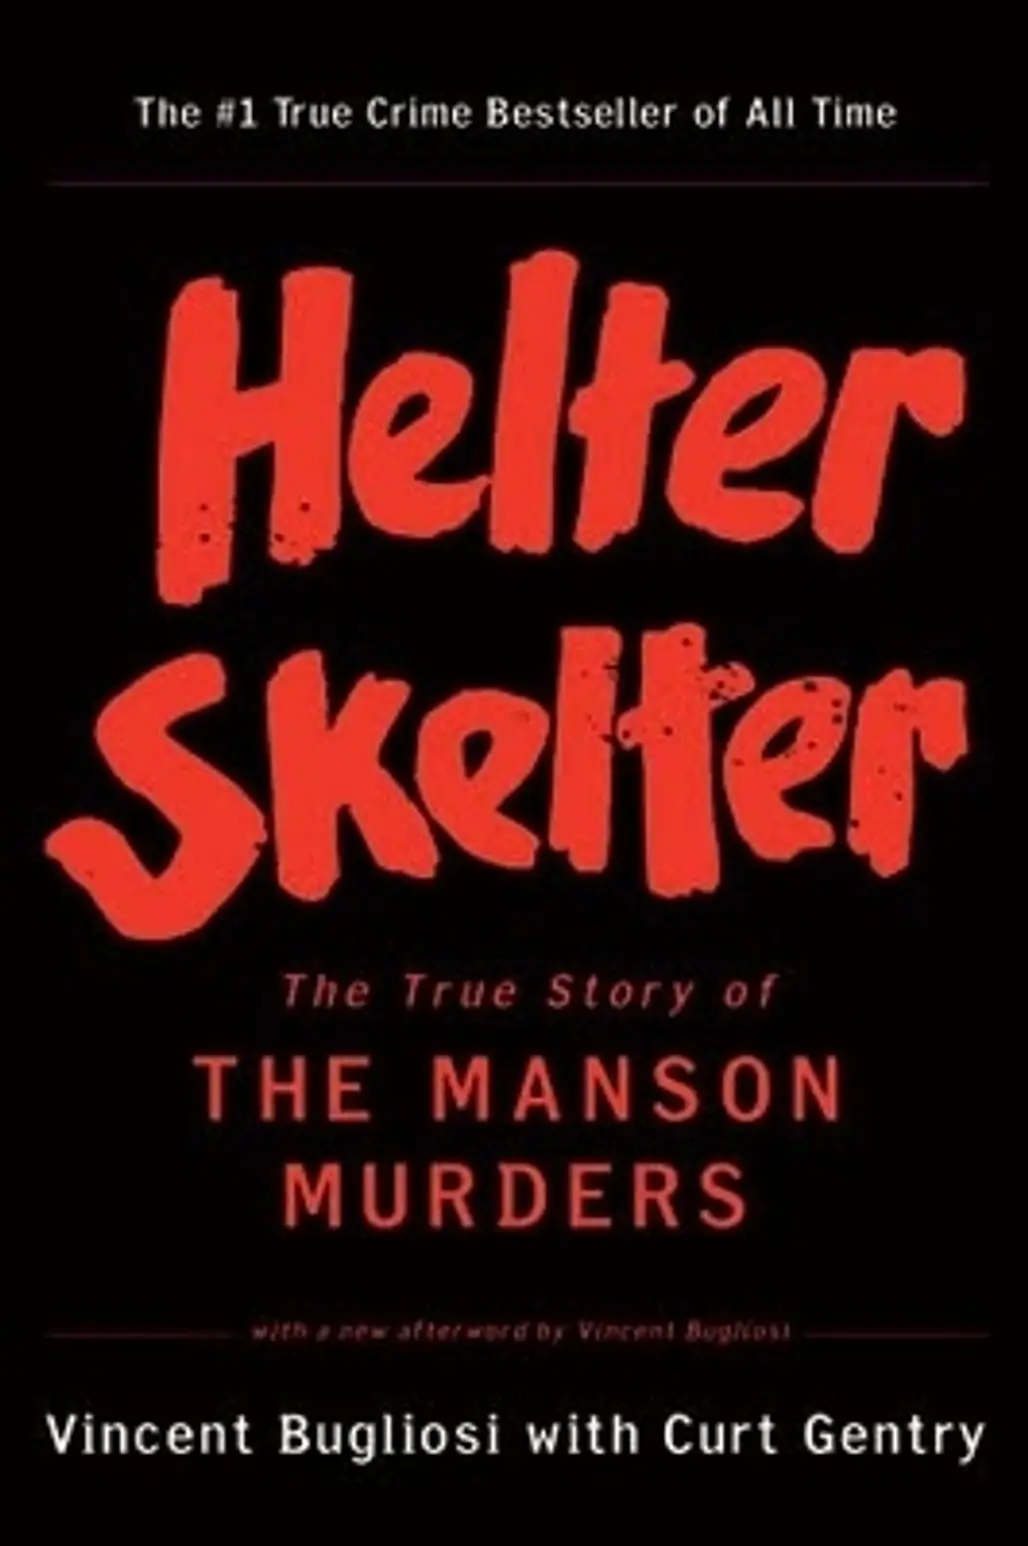 Helter Skelter by Vincent Bugliosi with Curt Gentry